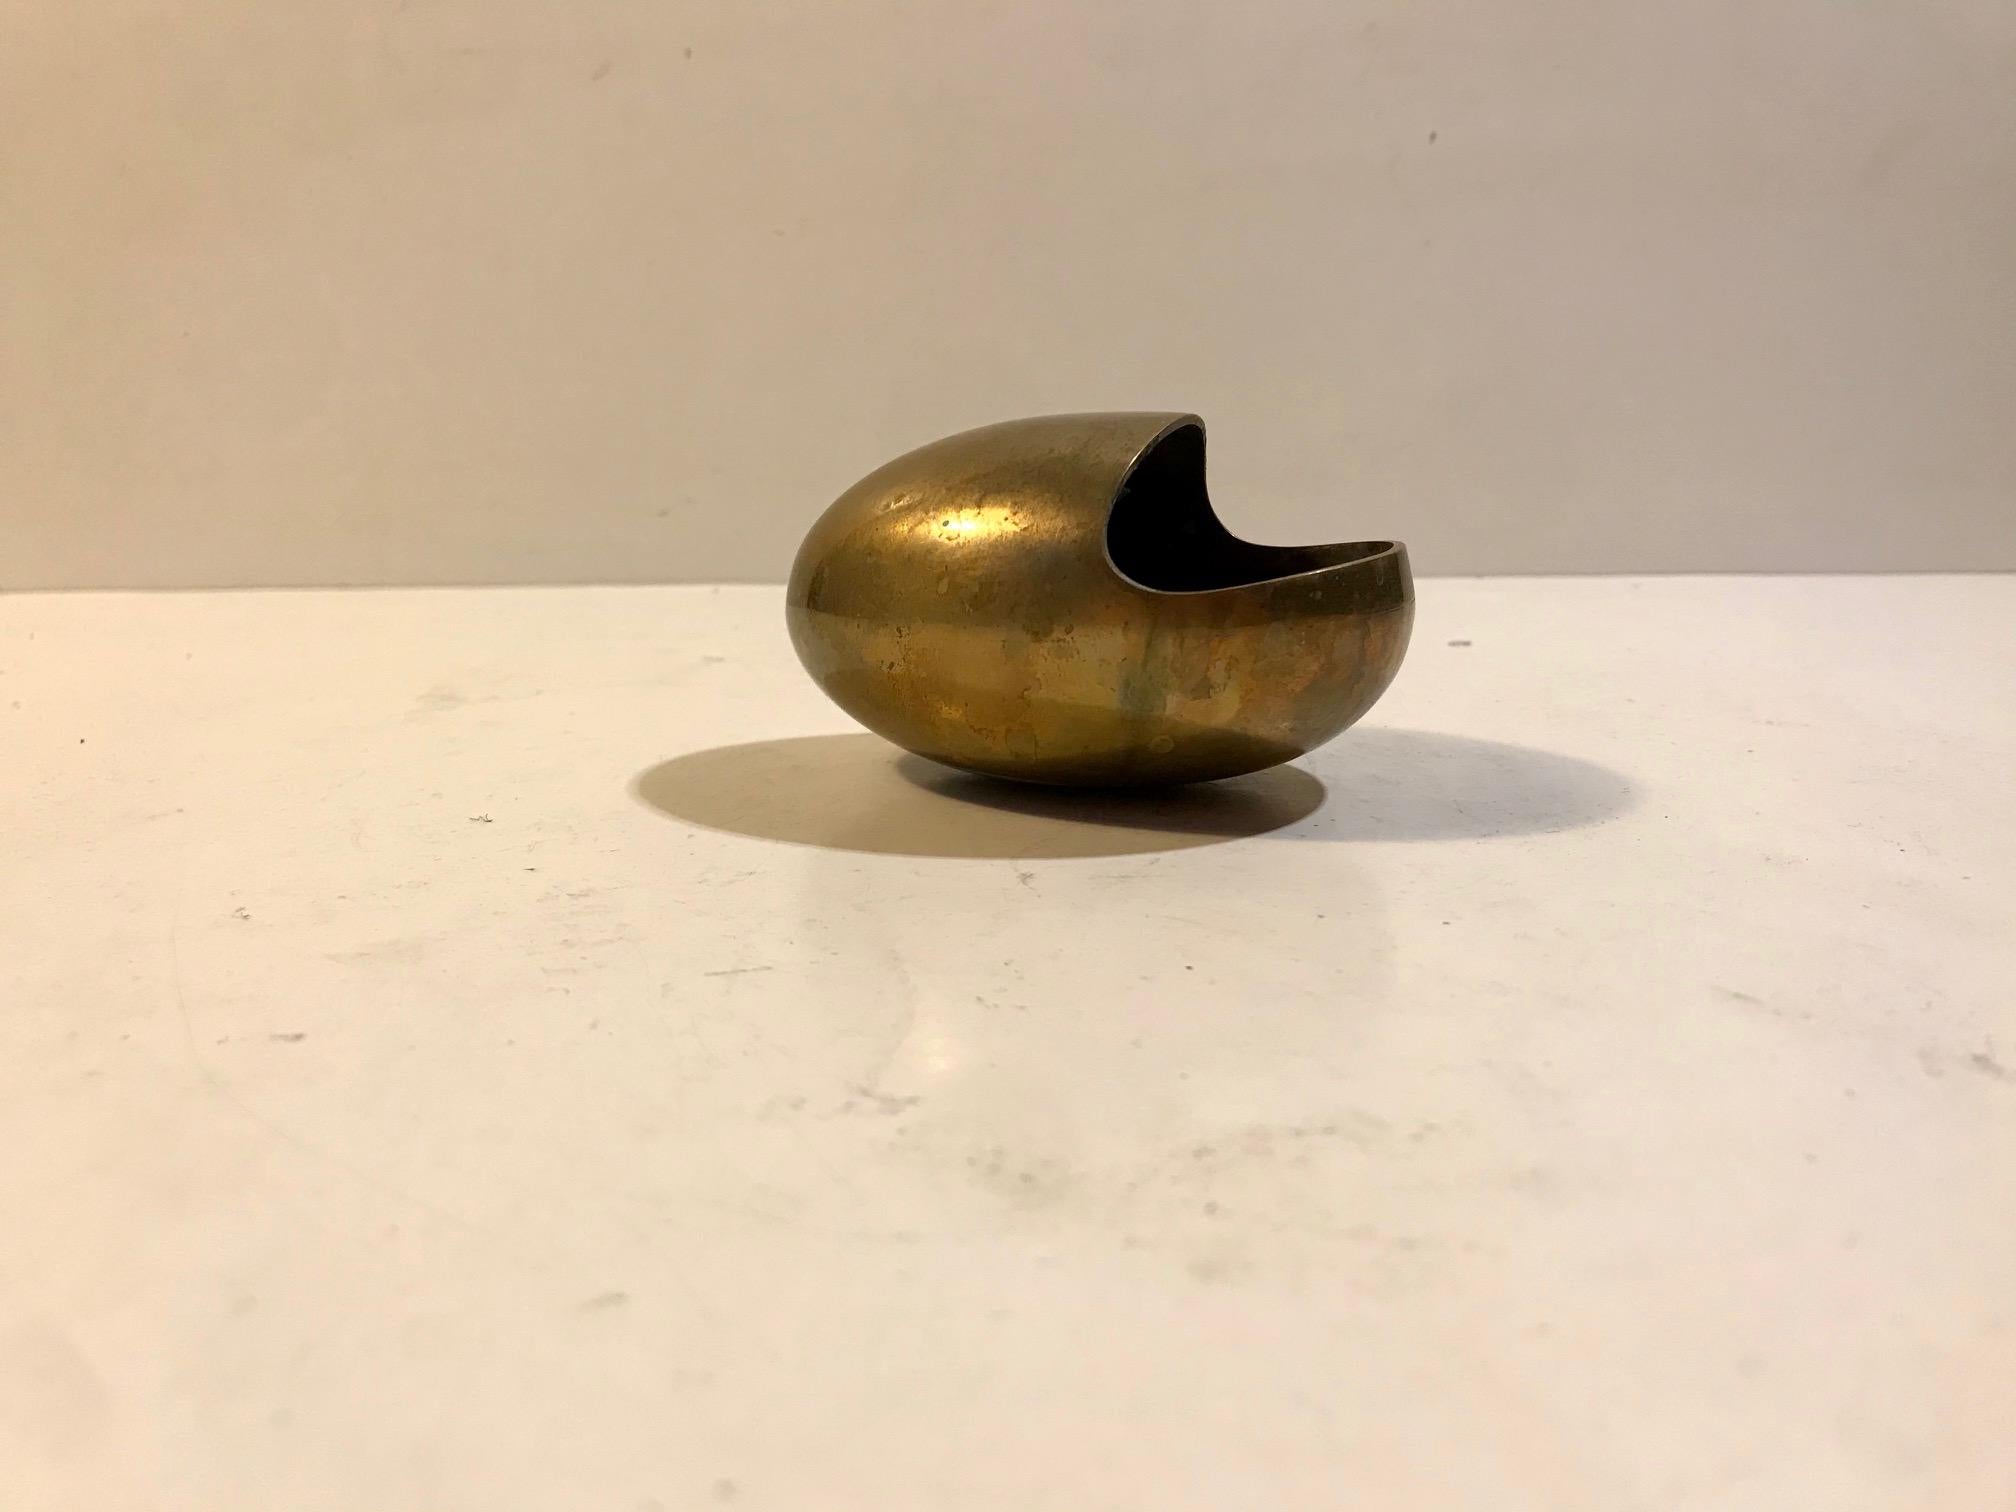 Egg shaped brass ashtray designed and manufactured by Carl Cohr in Fredericia Denmark during the 1950s. Stamped Cohr, Denmark - to the base. It remains in beautiful un-polished vintage condition with a deep/rich patina.